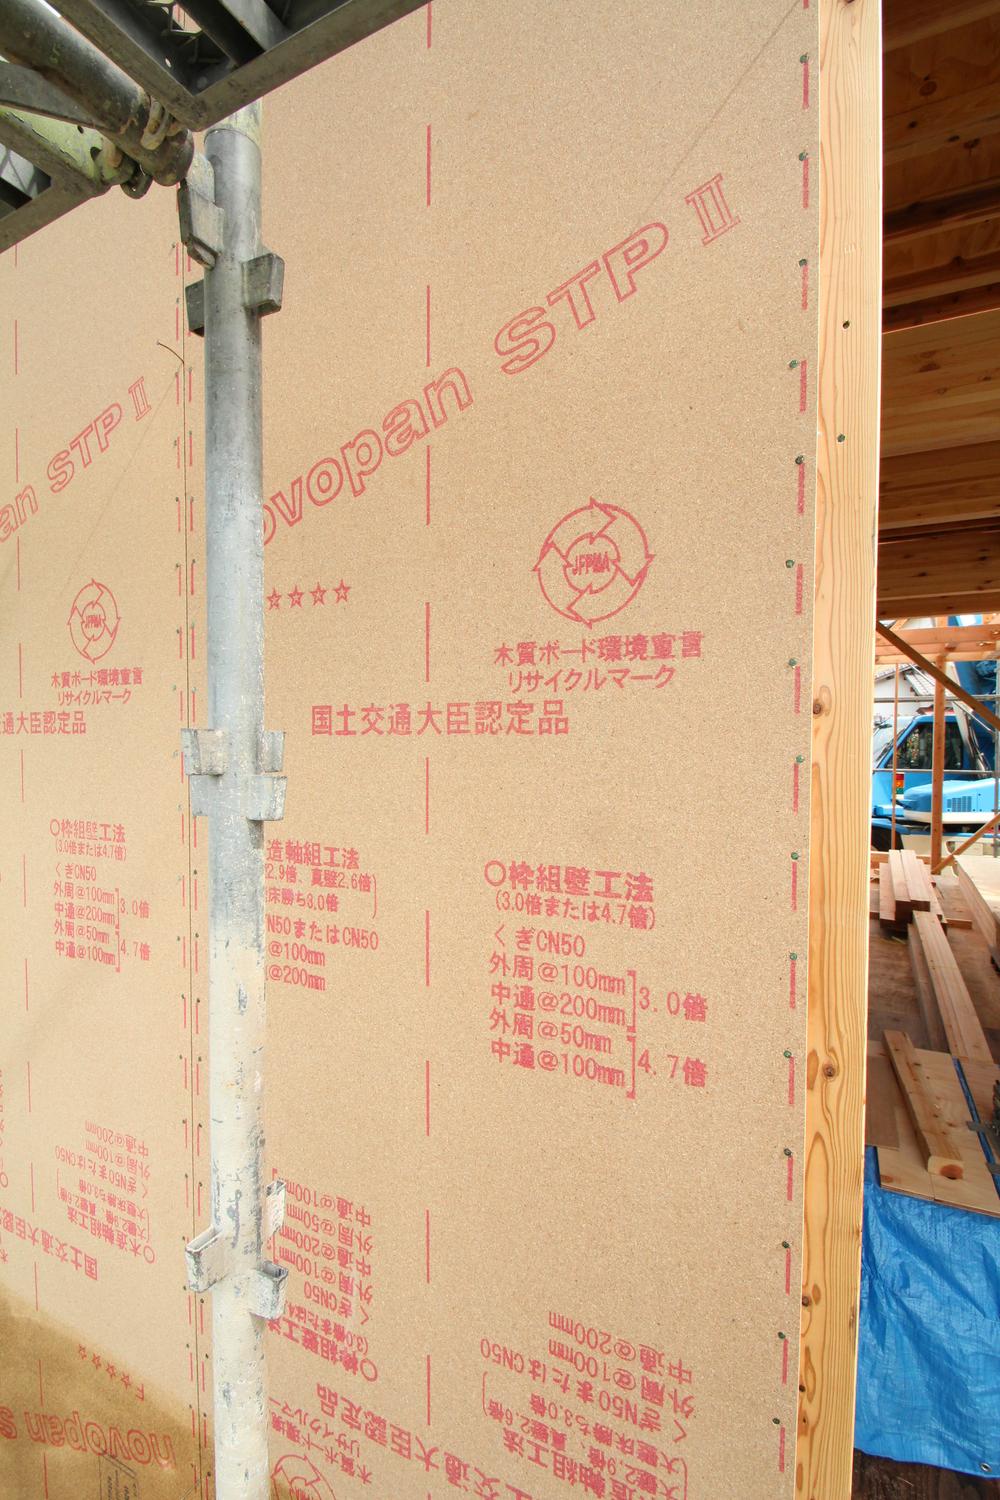 Construction ・ Construction method ・ specification.  ・ Earthquake in the seismic plywood ・ Strongly by wind pressure Sound insulation ・ It was also placed in the field of view, such as improvement of airtightness Yoshikawa residential house building.